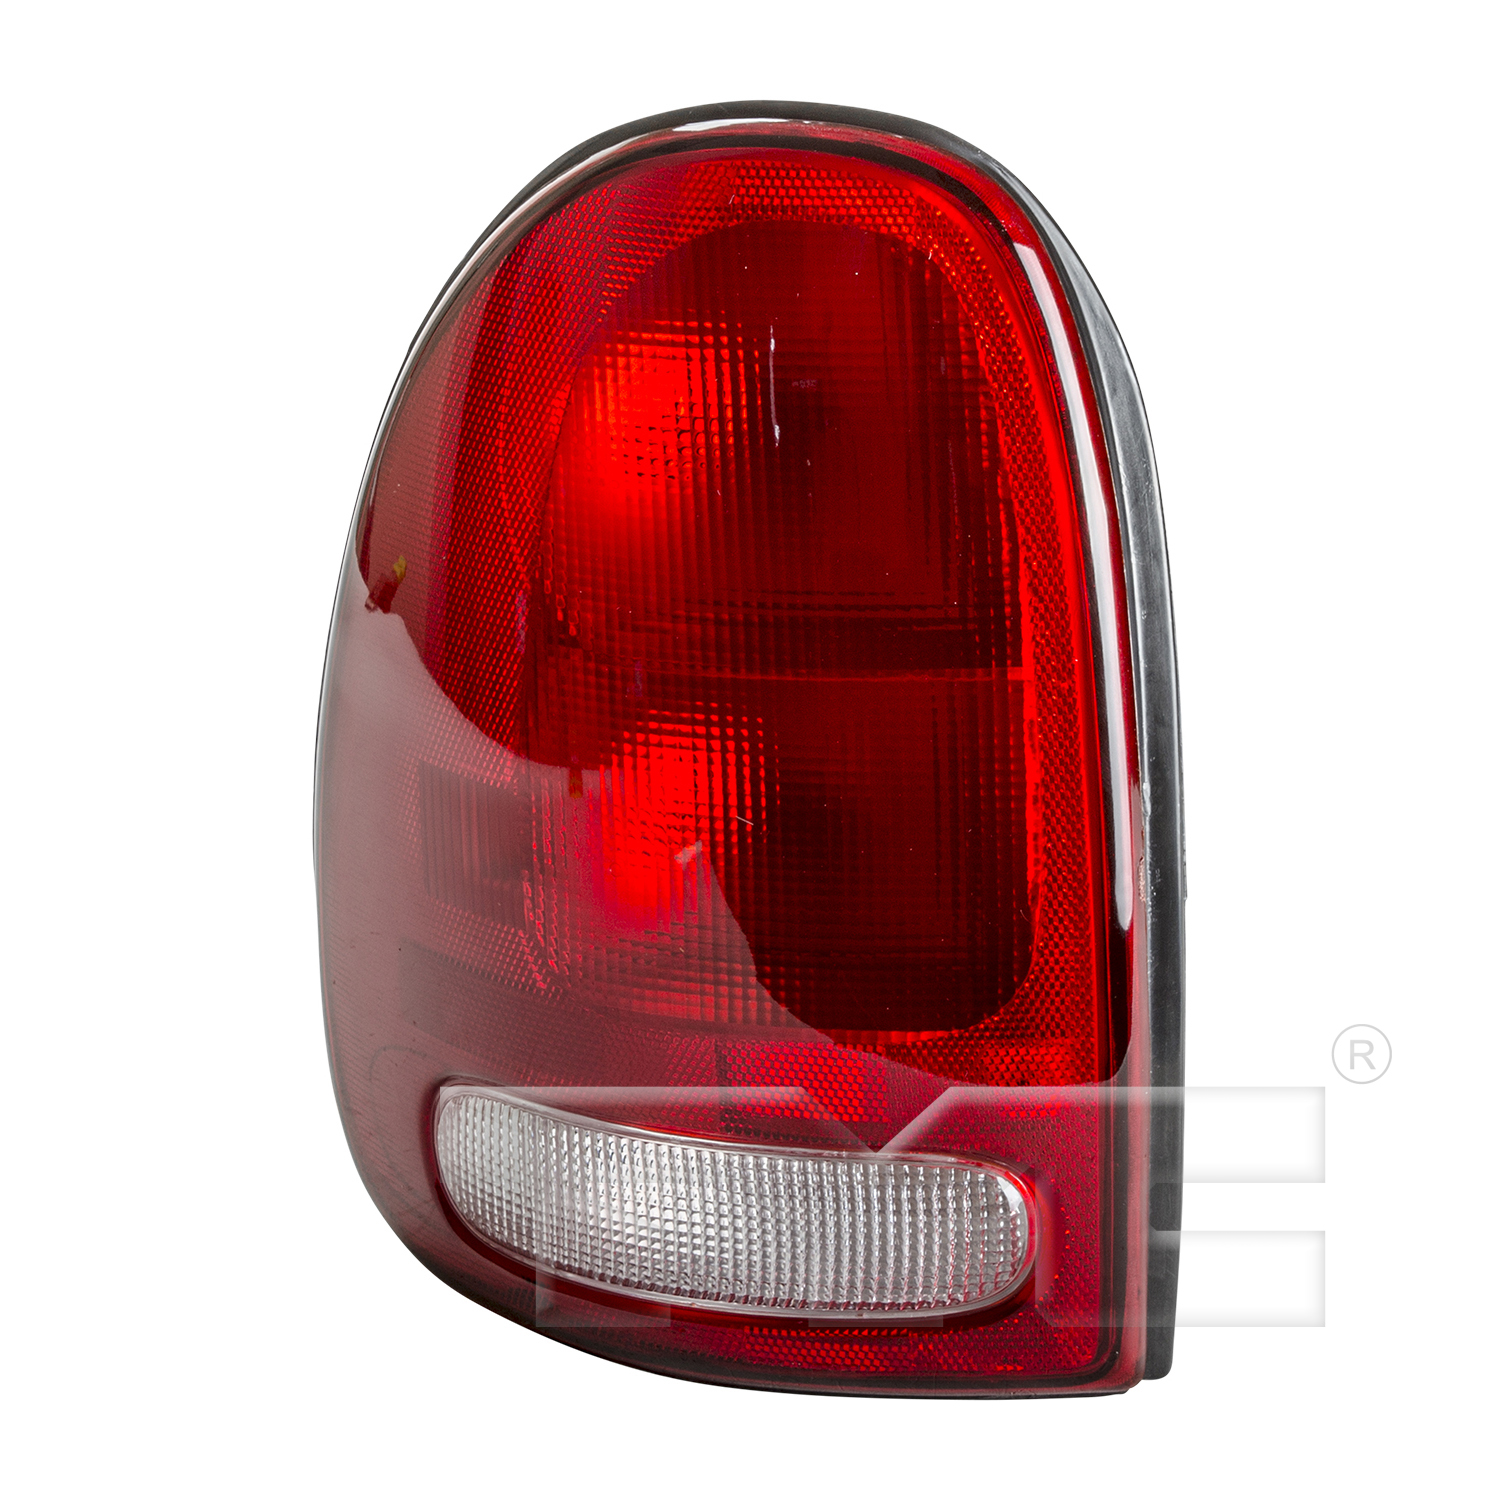 Aftermarket TAILLIGHTS for PLYMOUTH - VOYAGER, VOYAGER,96-00,LT Taillamp assy